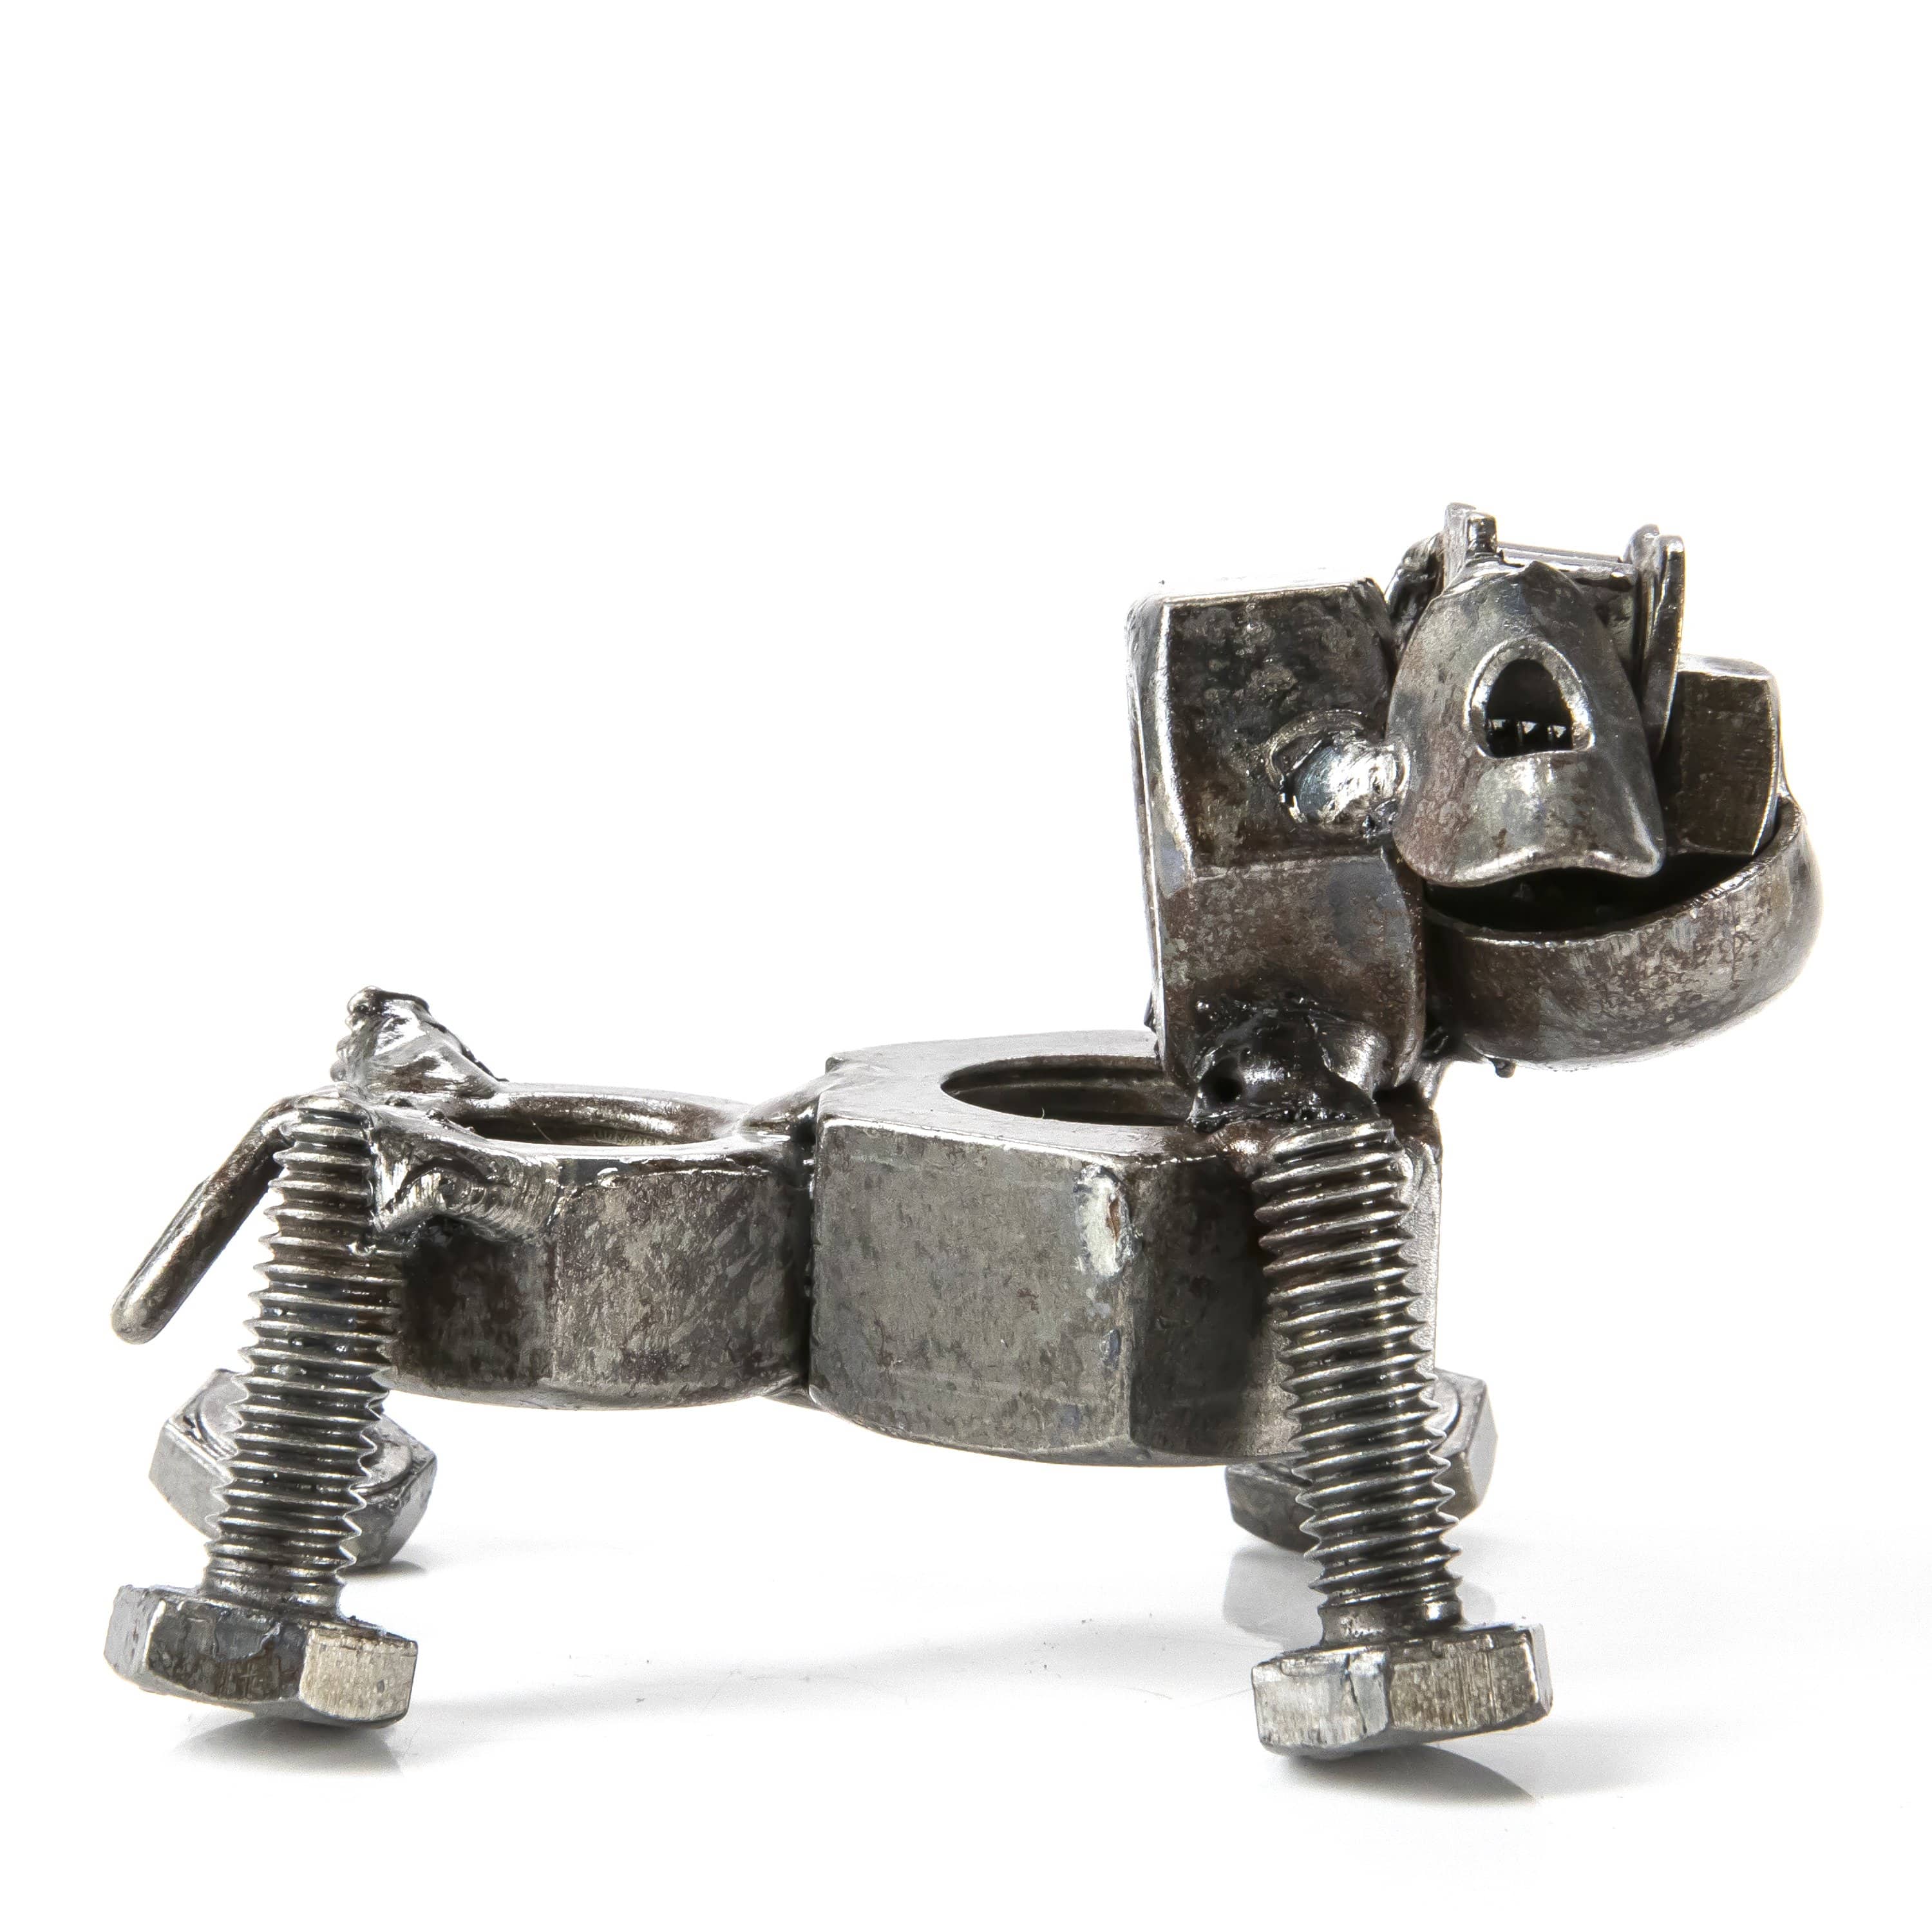 Kalifano Recycled Metal Art Dog Inspired Recycled Metal Sculpture RMS-100DOG-N